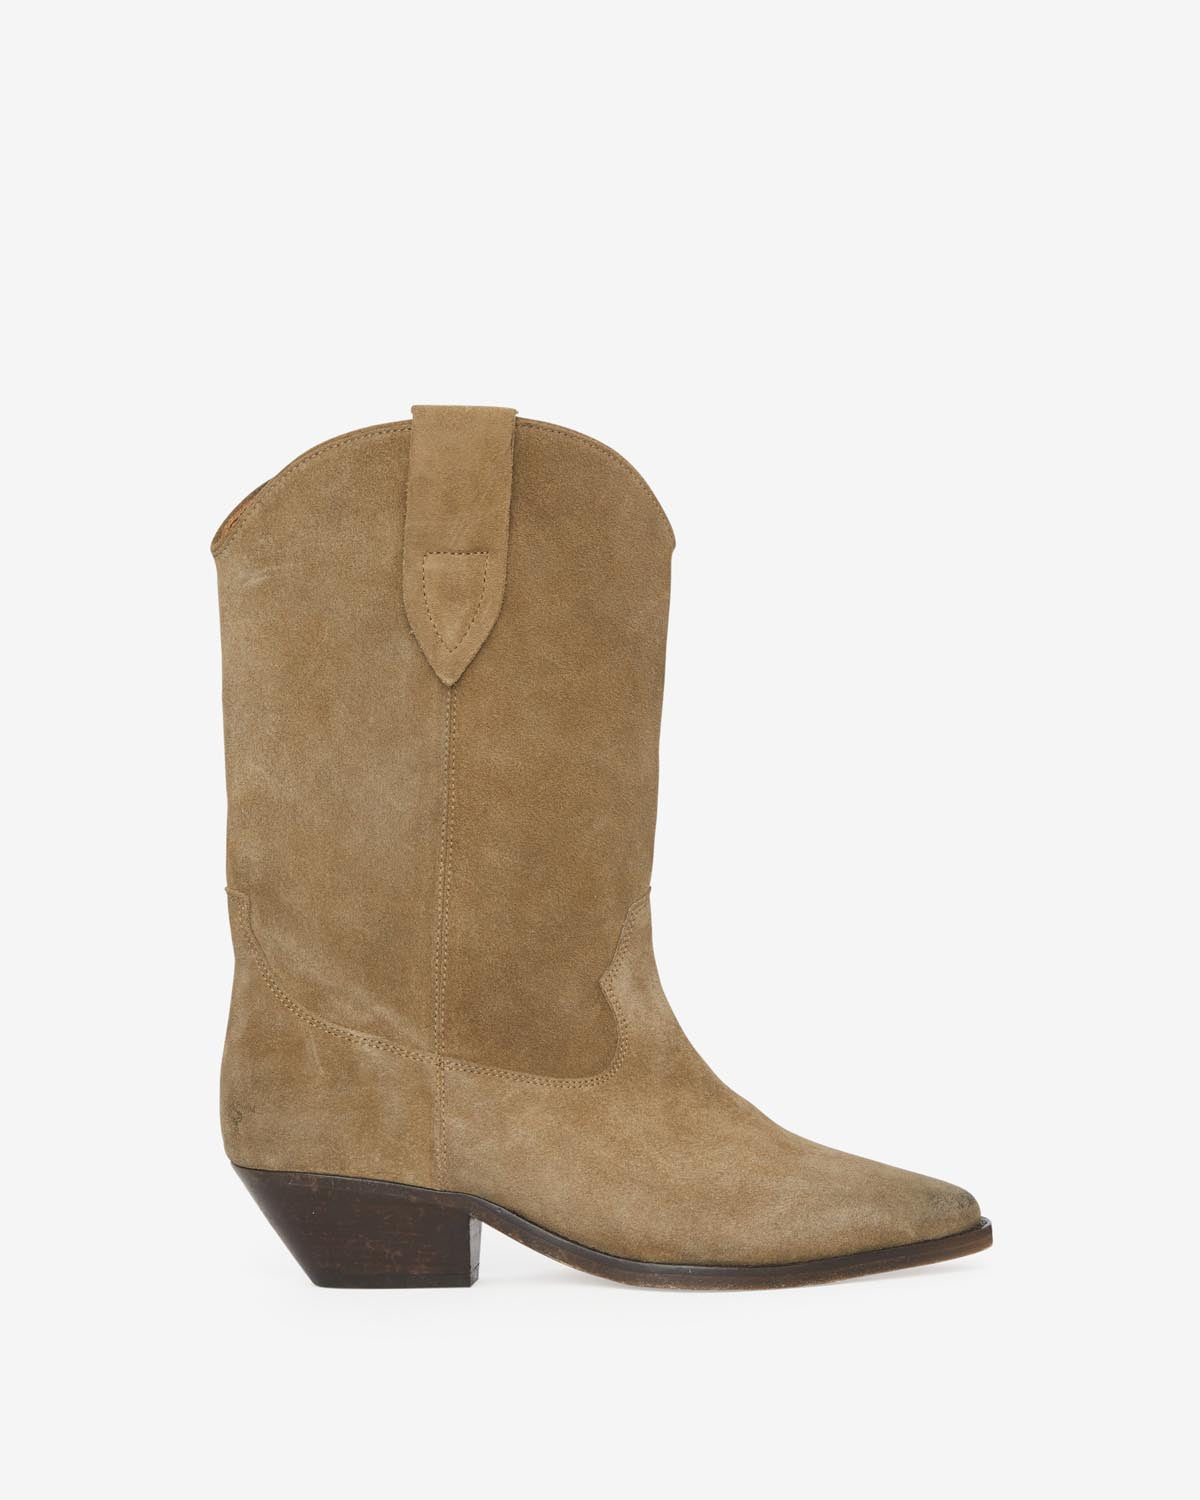 Stiefel duerto Woman Taupe 1